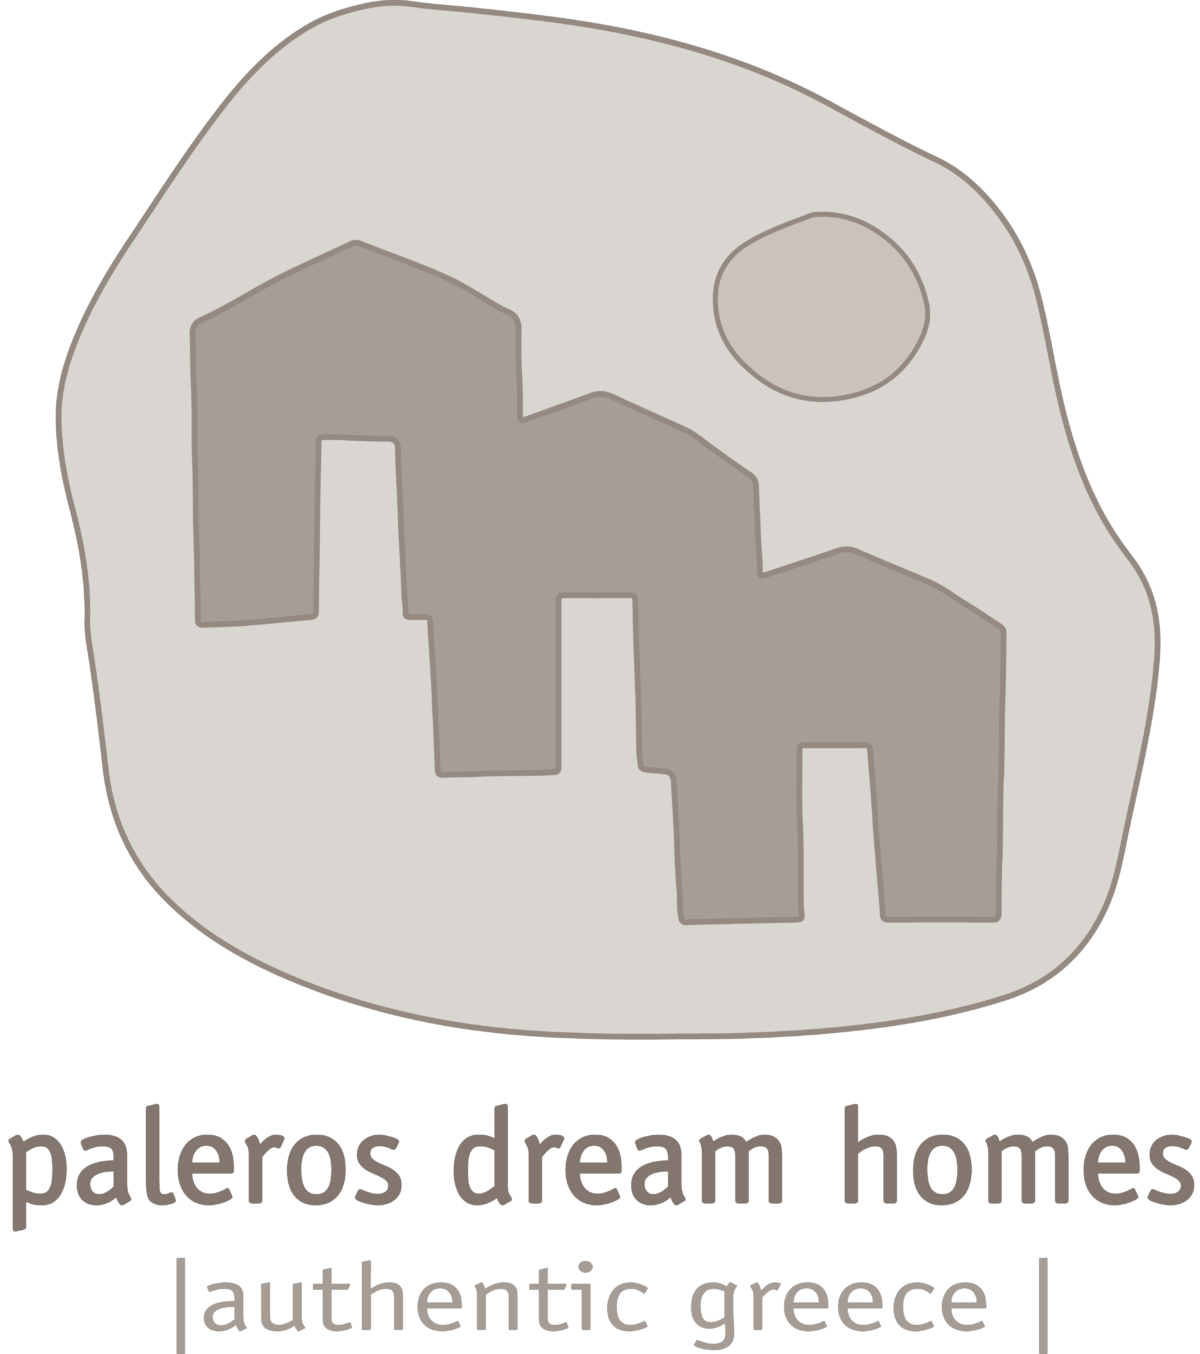 2 Architect positions (Architect engineer & 3d visualization Architect) at Paleros Dream Homes